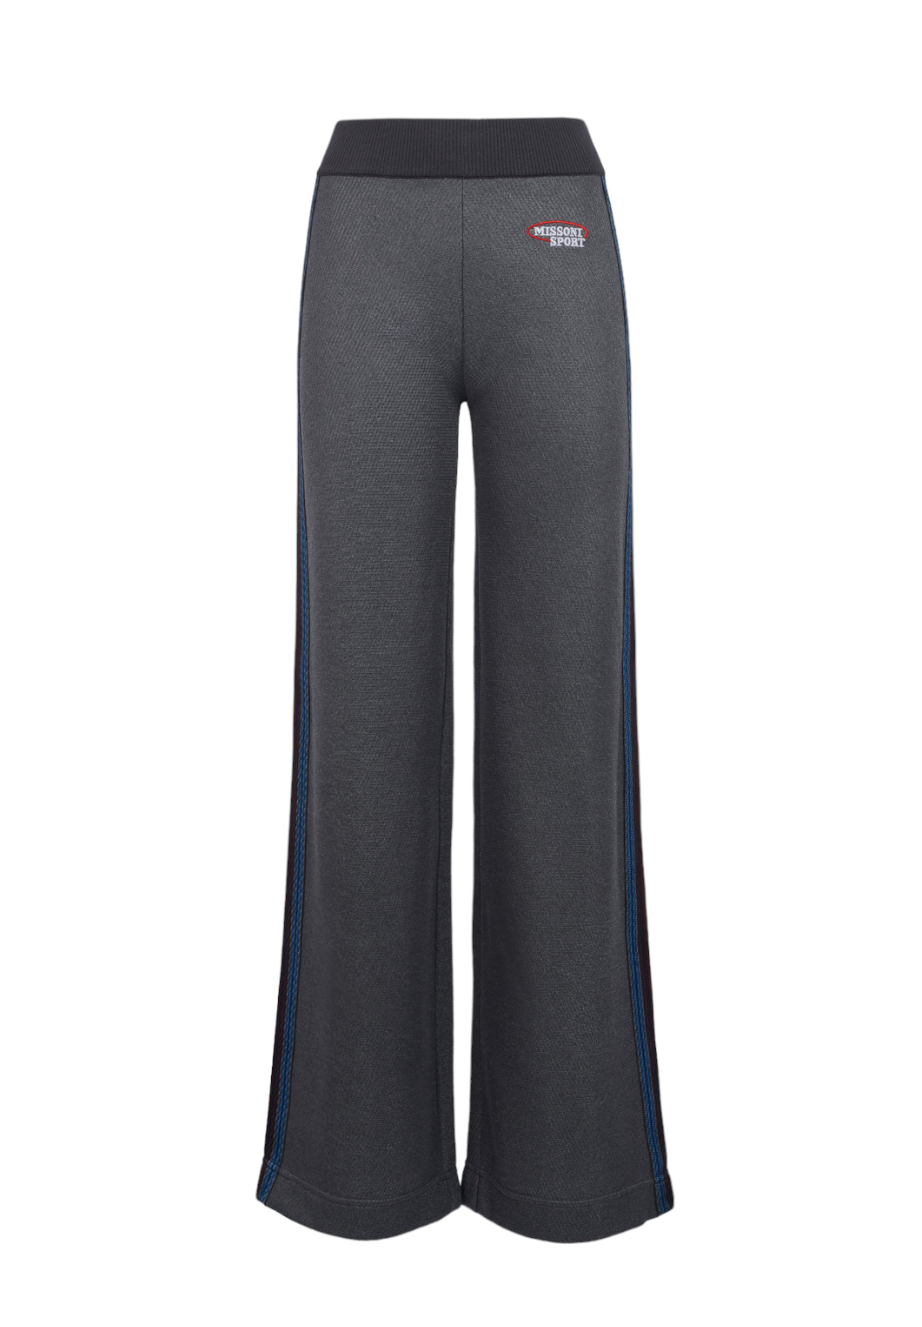 Missoni Women's Flared Trousers in Cotton Blend with Logo Rust - Front View